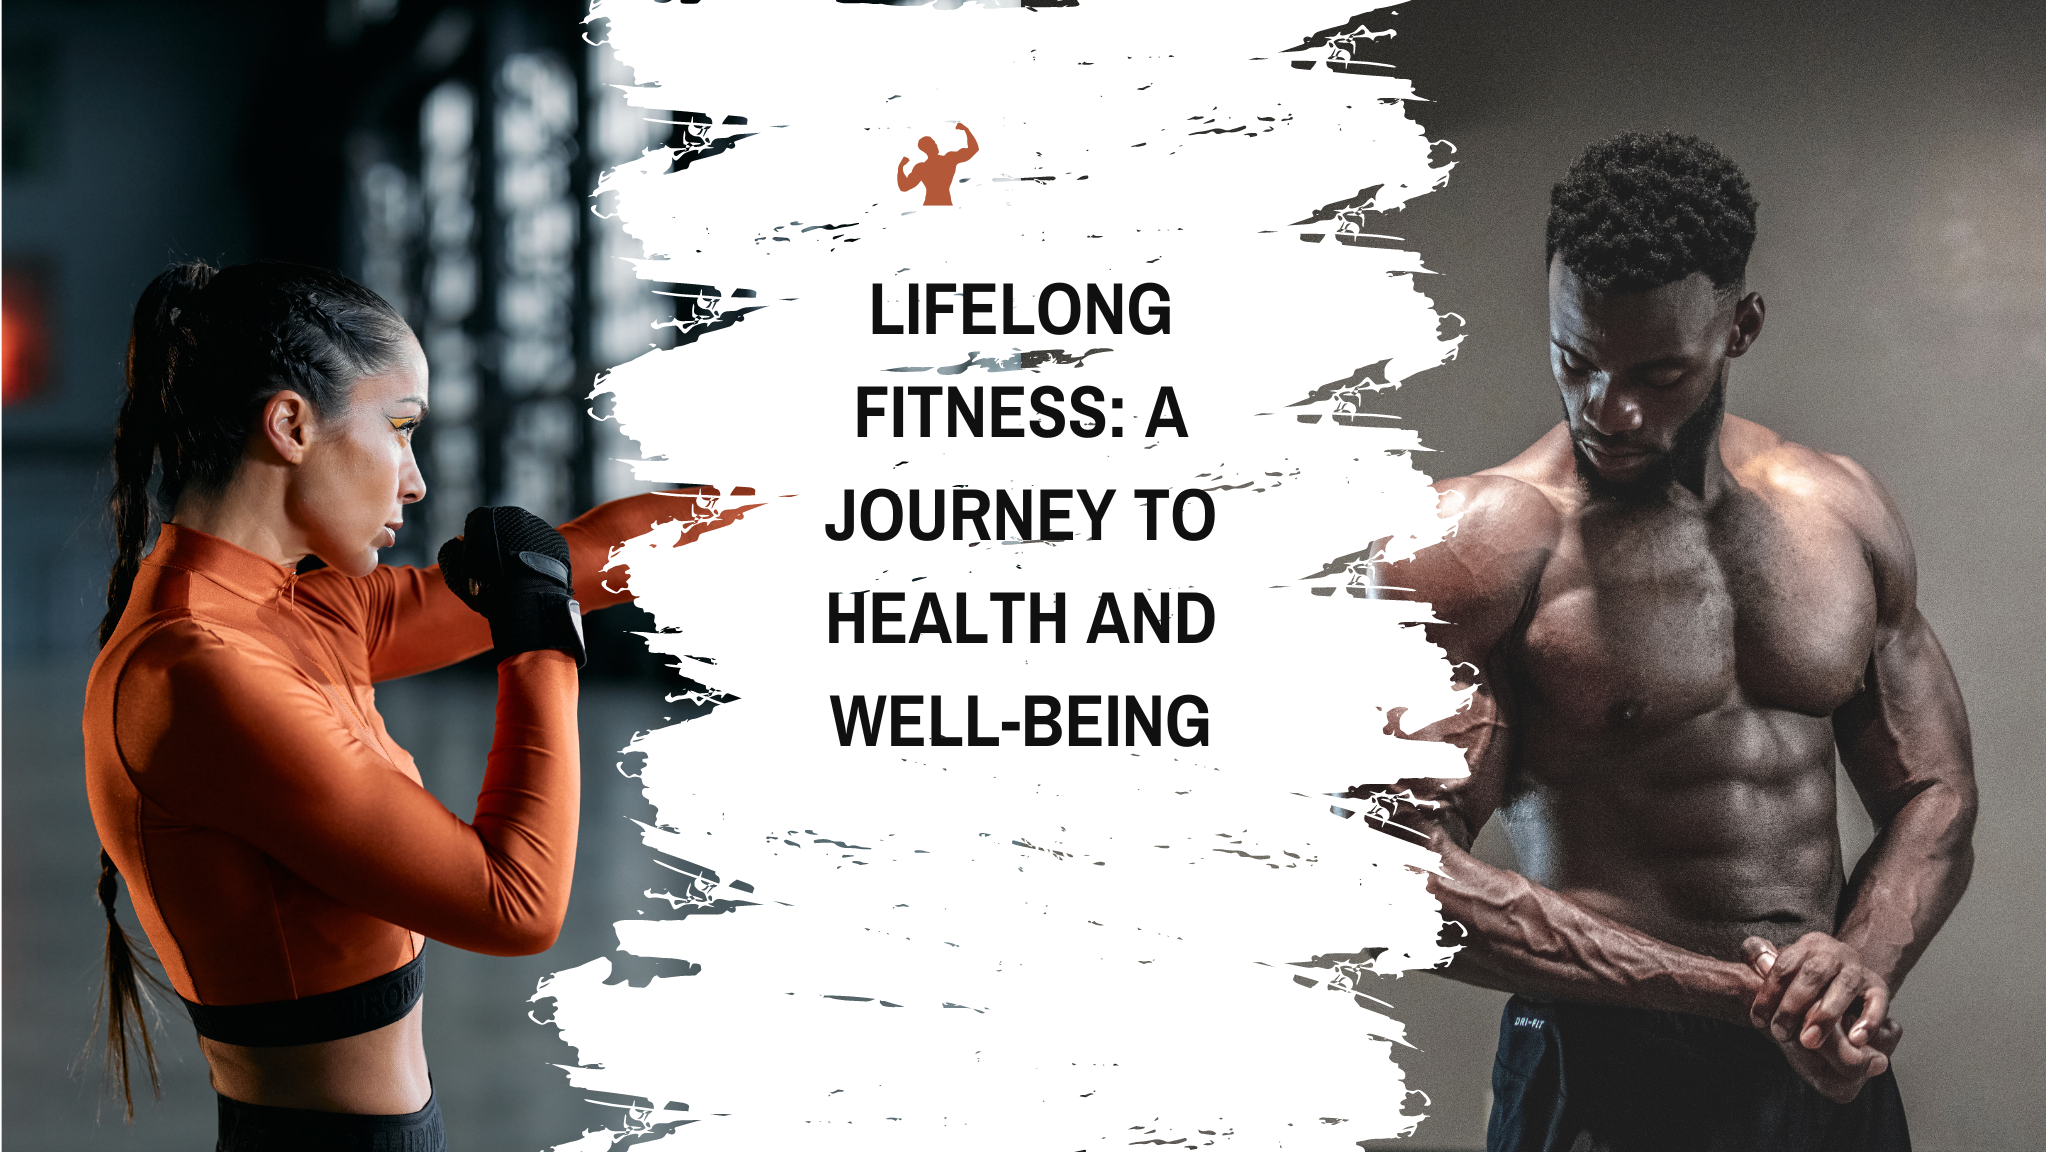 Lifelong Fitness: A Journey to Health and Well-being